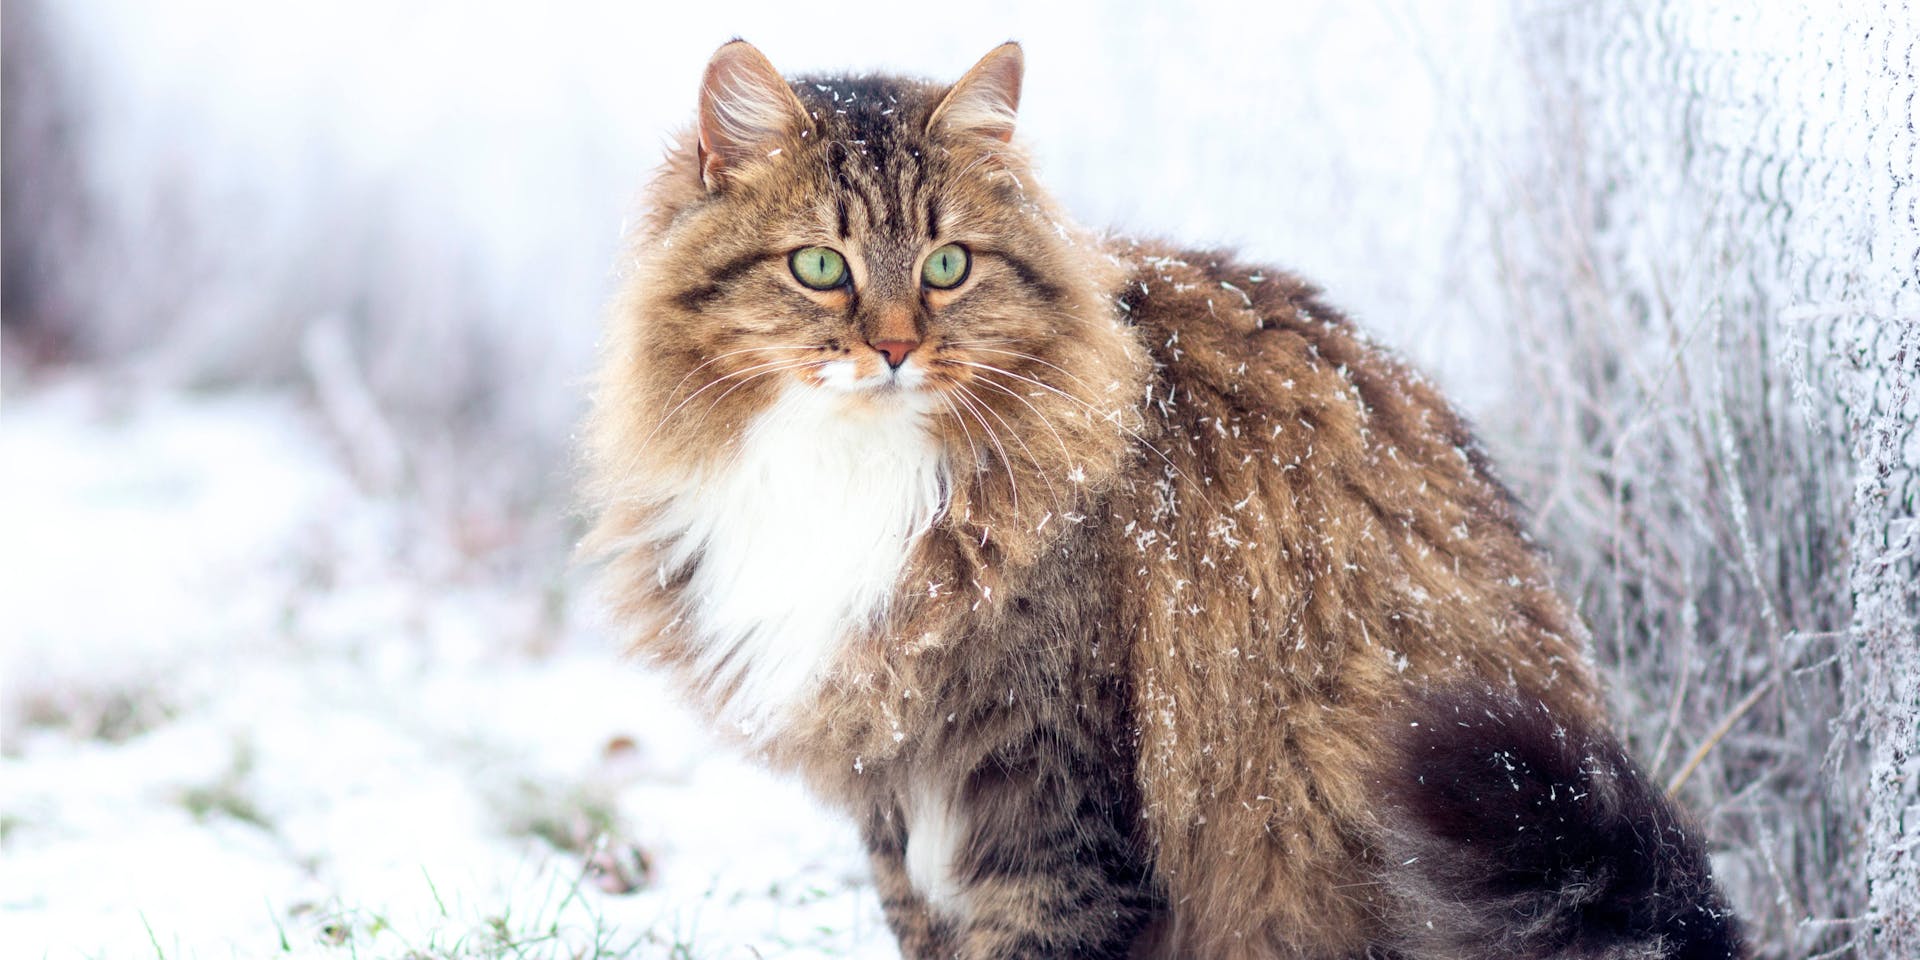 A fluffy Maine Coon cat in the winter.